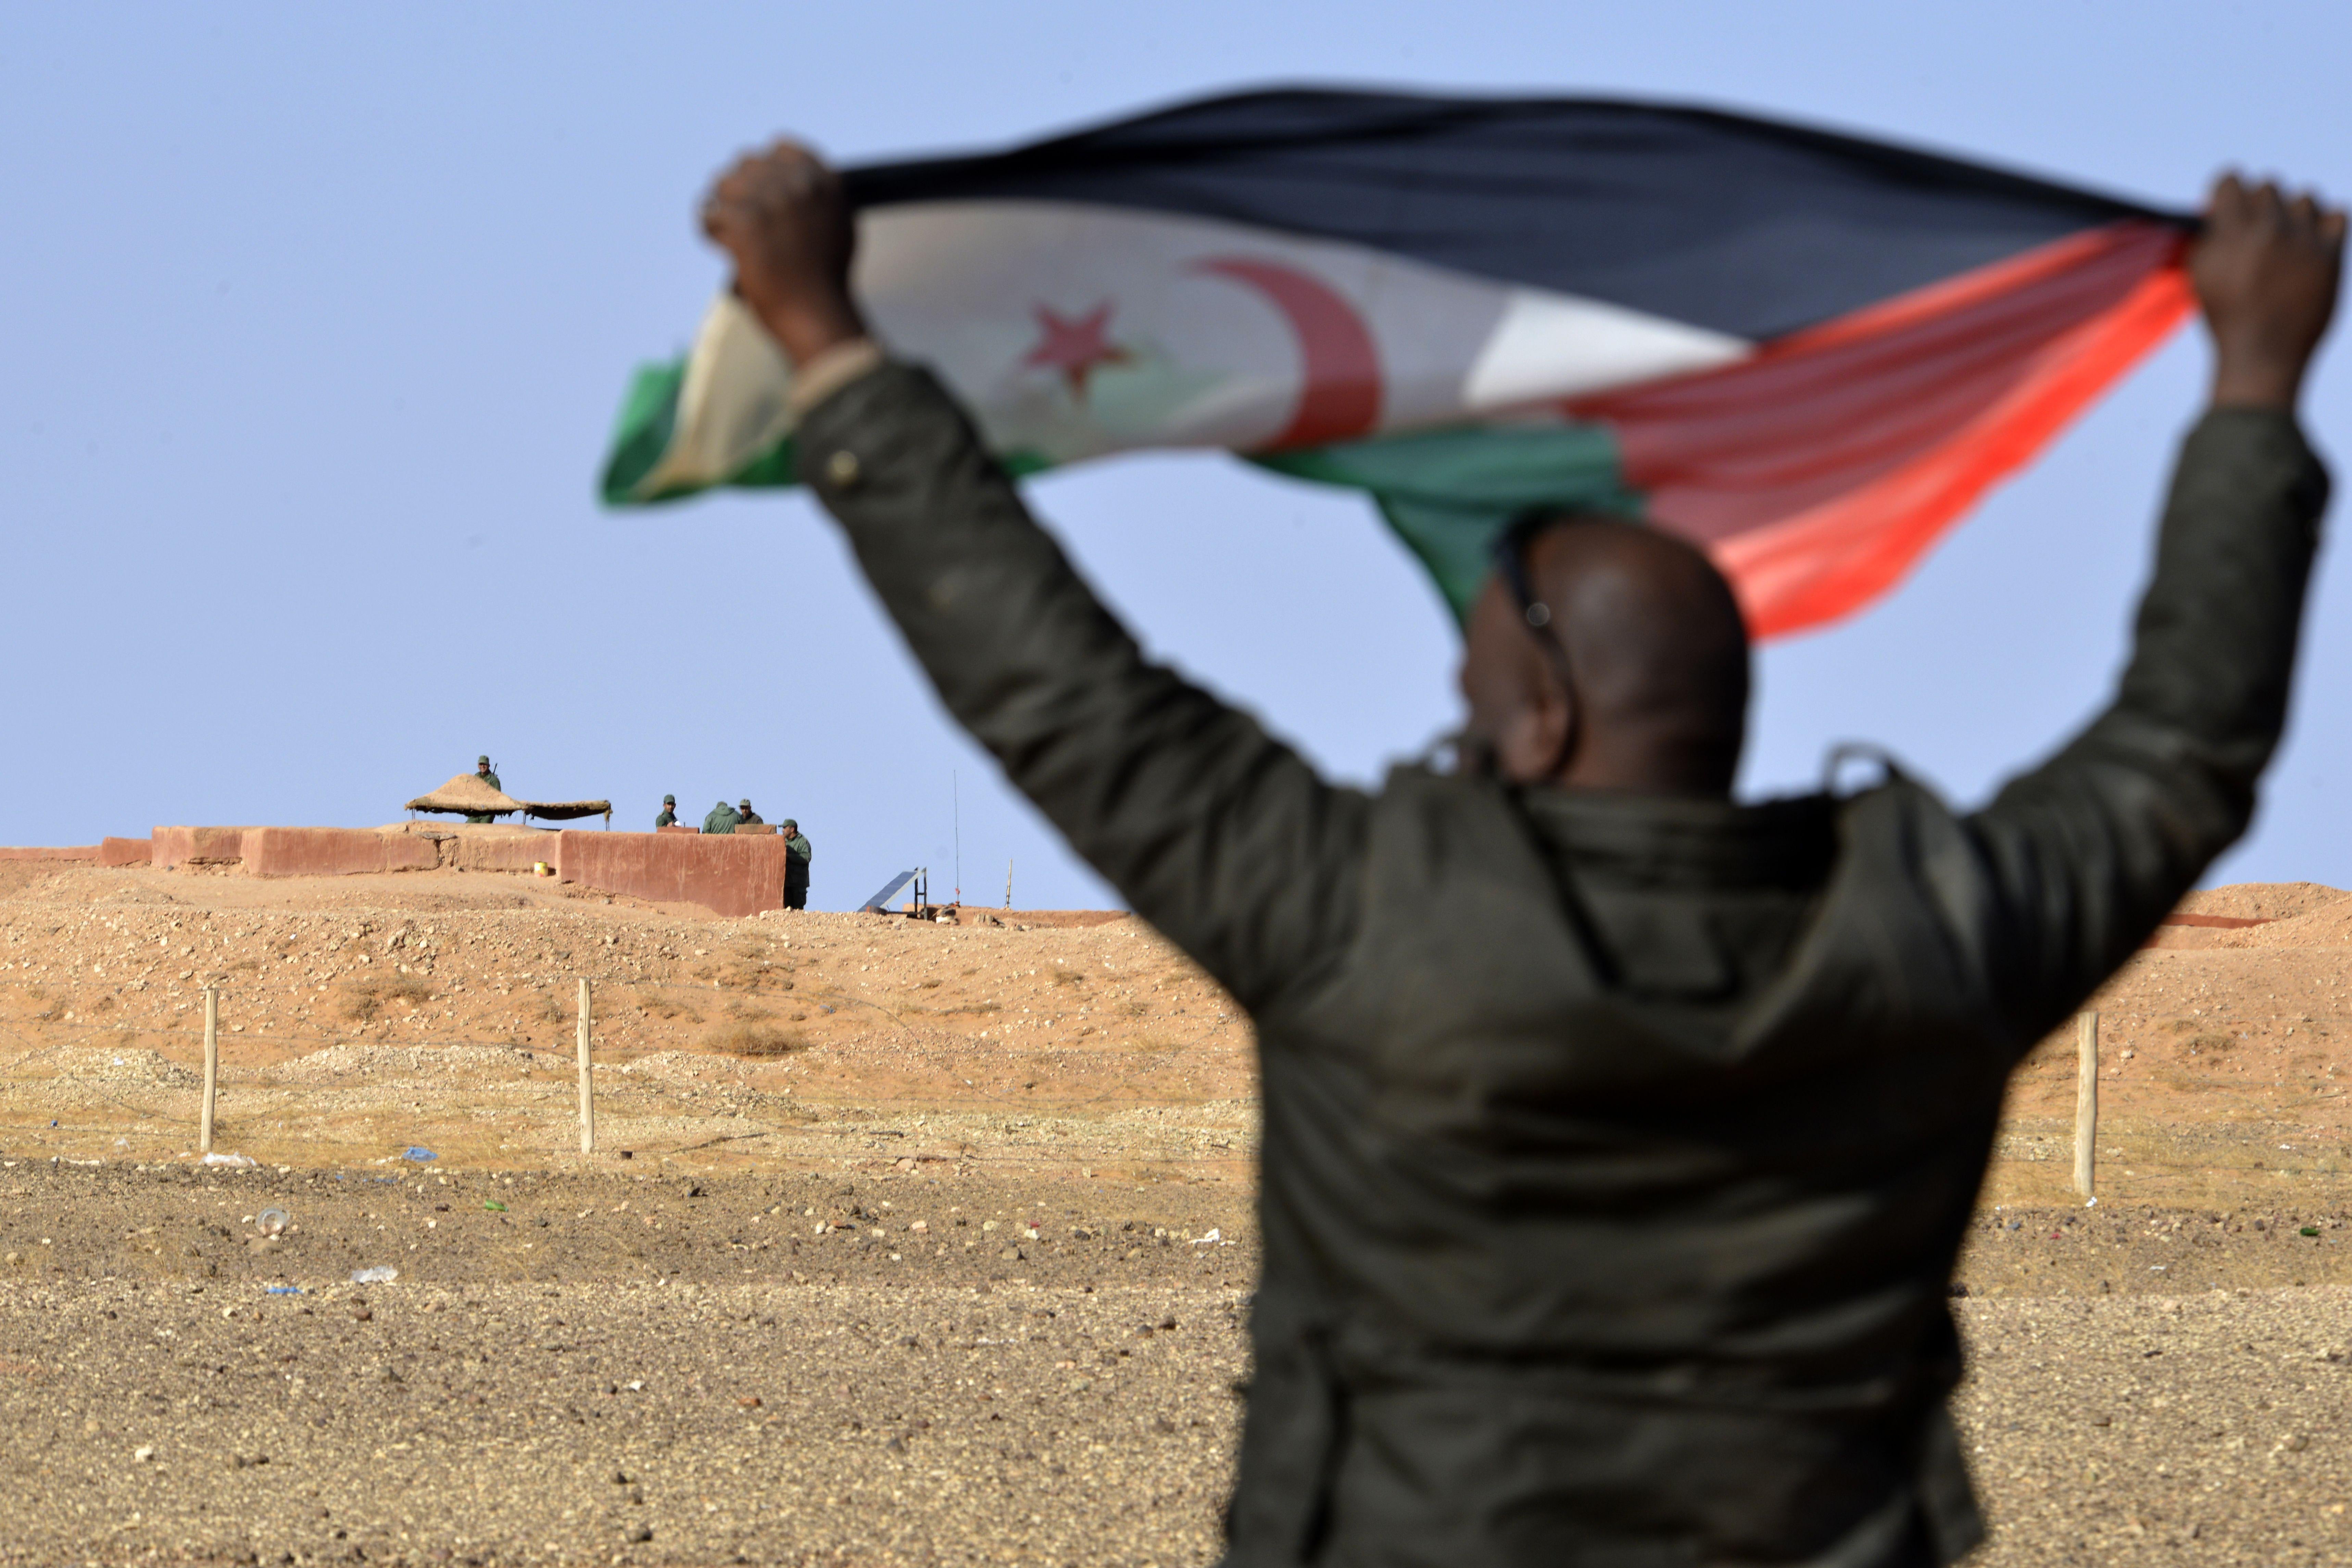 A Saharawi man holds up a Polisario Front flag in the Al-Mahbes area near Moroccan soldiers guarding the wall separating the Polisario controlled Western Sahara from Morocco on February 3, 2017. - It is the world's oldest functioning security barrier, dubbed a wall of "shame" and "death" by Western Sahara residents and leaders who want independence from Morocco. (Photo by STRINGER / AFP) / TO GO WITH AFP STORY BY AMAL BELALLOUFI        (Photo credit should read STRINGER/AFP via Getty Images)